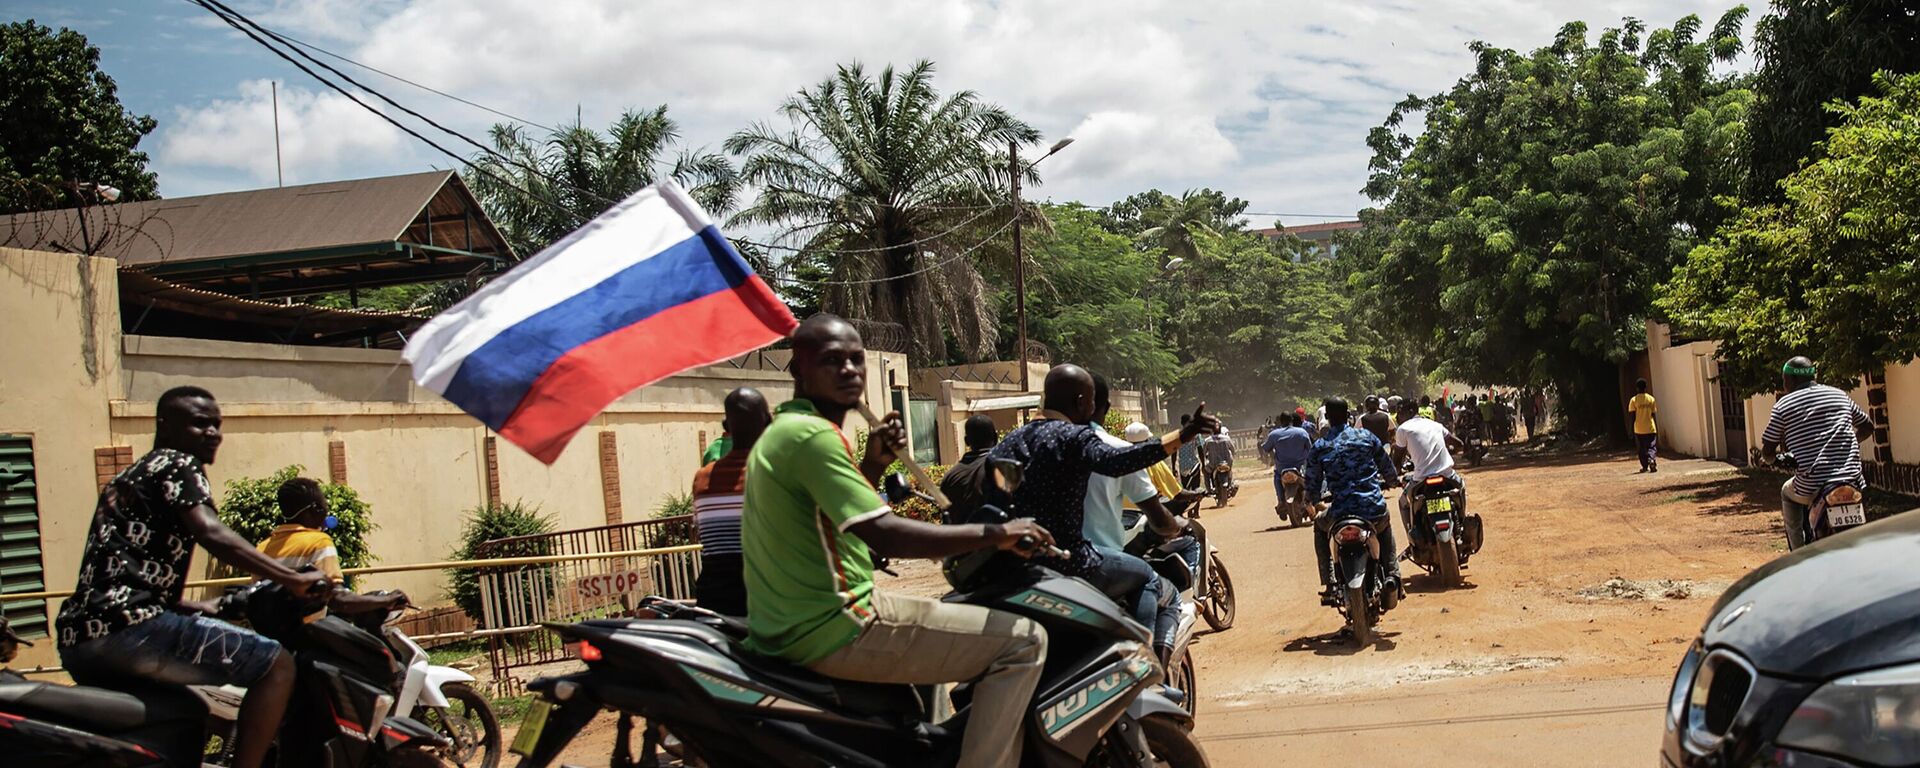 Supporters of Capt. Ibrahim Traore parade waving a Russian flag in the streets of Ouagadougou, Burkina Faso, Sunday, Oct. 2, 2022. Burkina Faso's new junta leadership is calling for calm after the French Embassy and other buildings were attacked. The unrest following the West African nation's second coup this year came after a junta statement alleged that the ousted interim president was at a French military base in Ouagadougou. France vehemently denied the claim and has urged its citizens to stay indoors amid rising anti-French sentiment in the streets. (AP Photo/Sophie Garcia) - Sputnik Africa, 1920, 30.01.2023